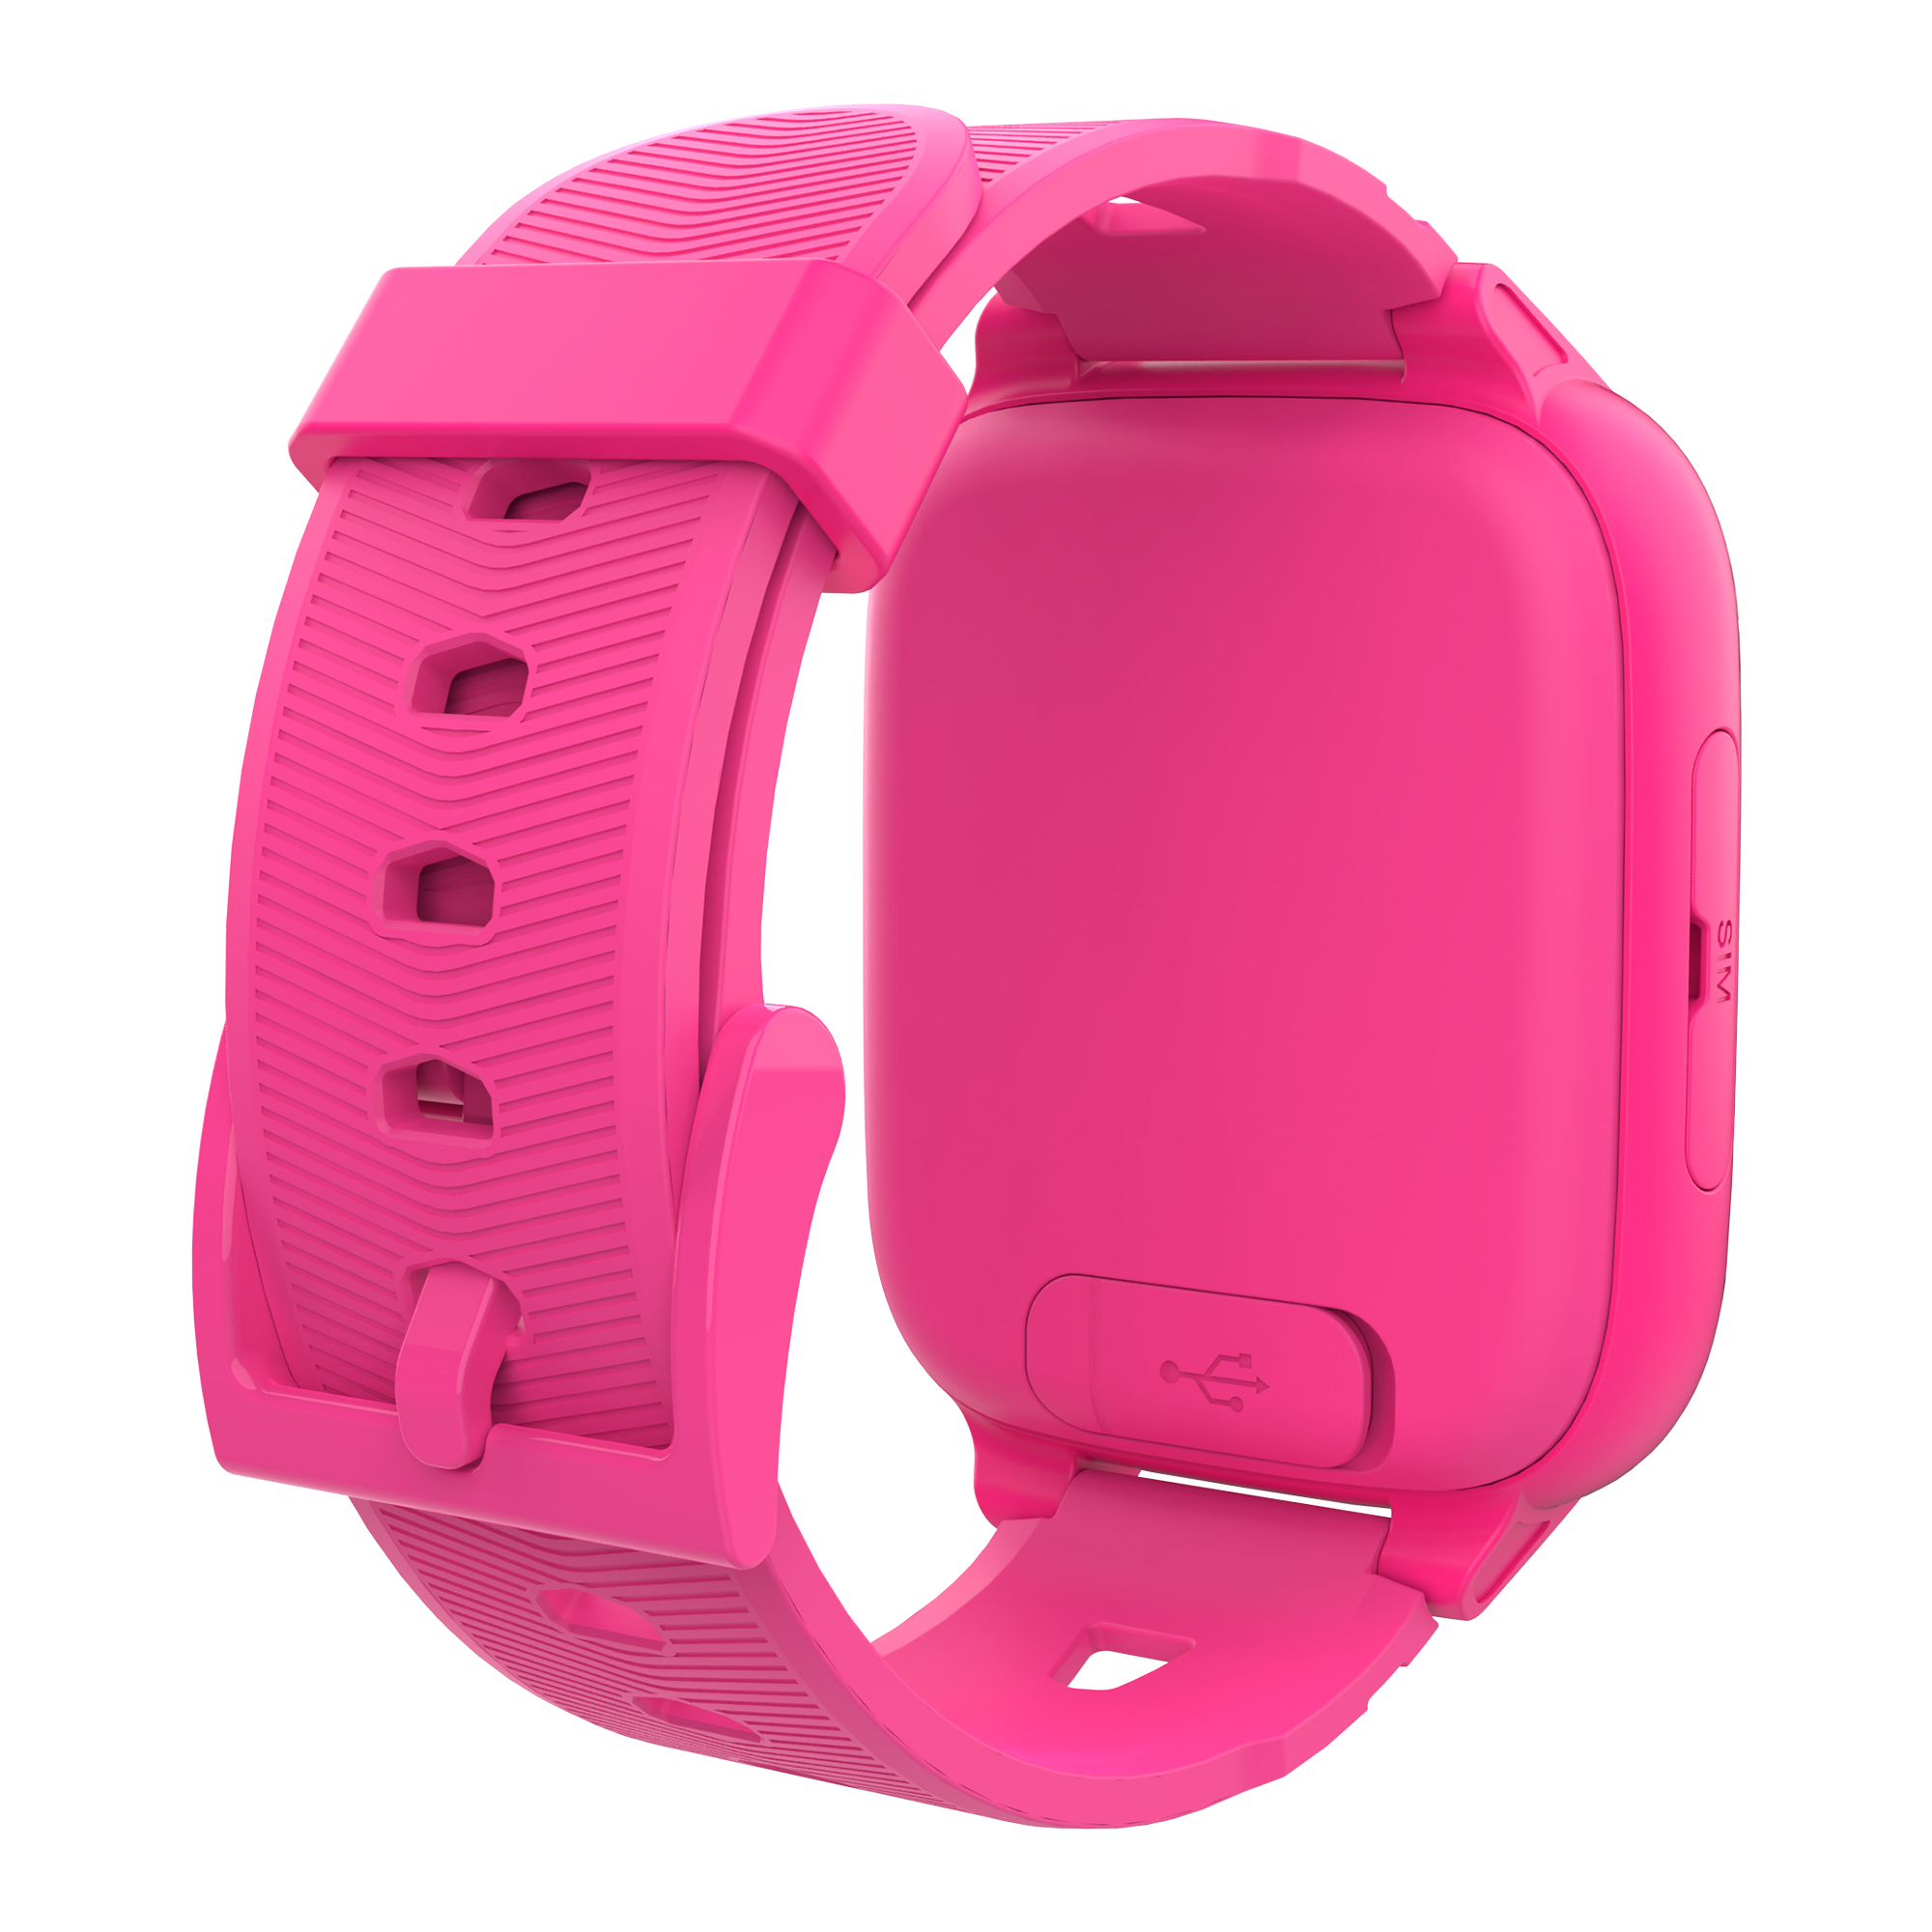 Back View: Xplora - Kids' XGO3 (GPS + Cellular) Smartwatch 42mm Calls, Messages, SOS, GPS Tracker, Camera, Step Counter, SIM Card included - Pink